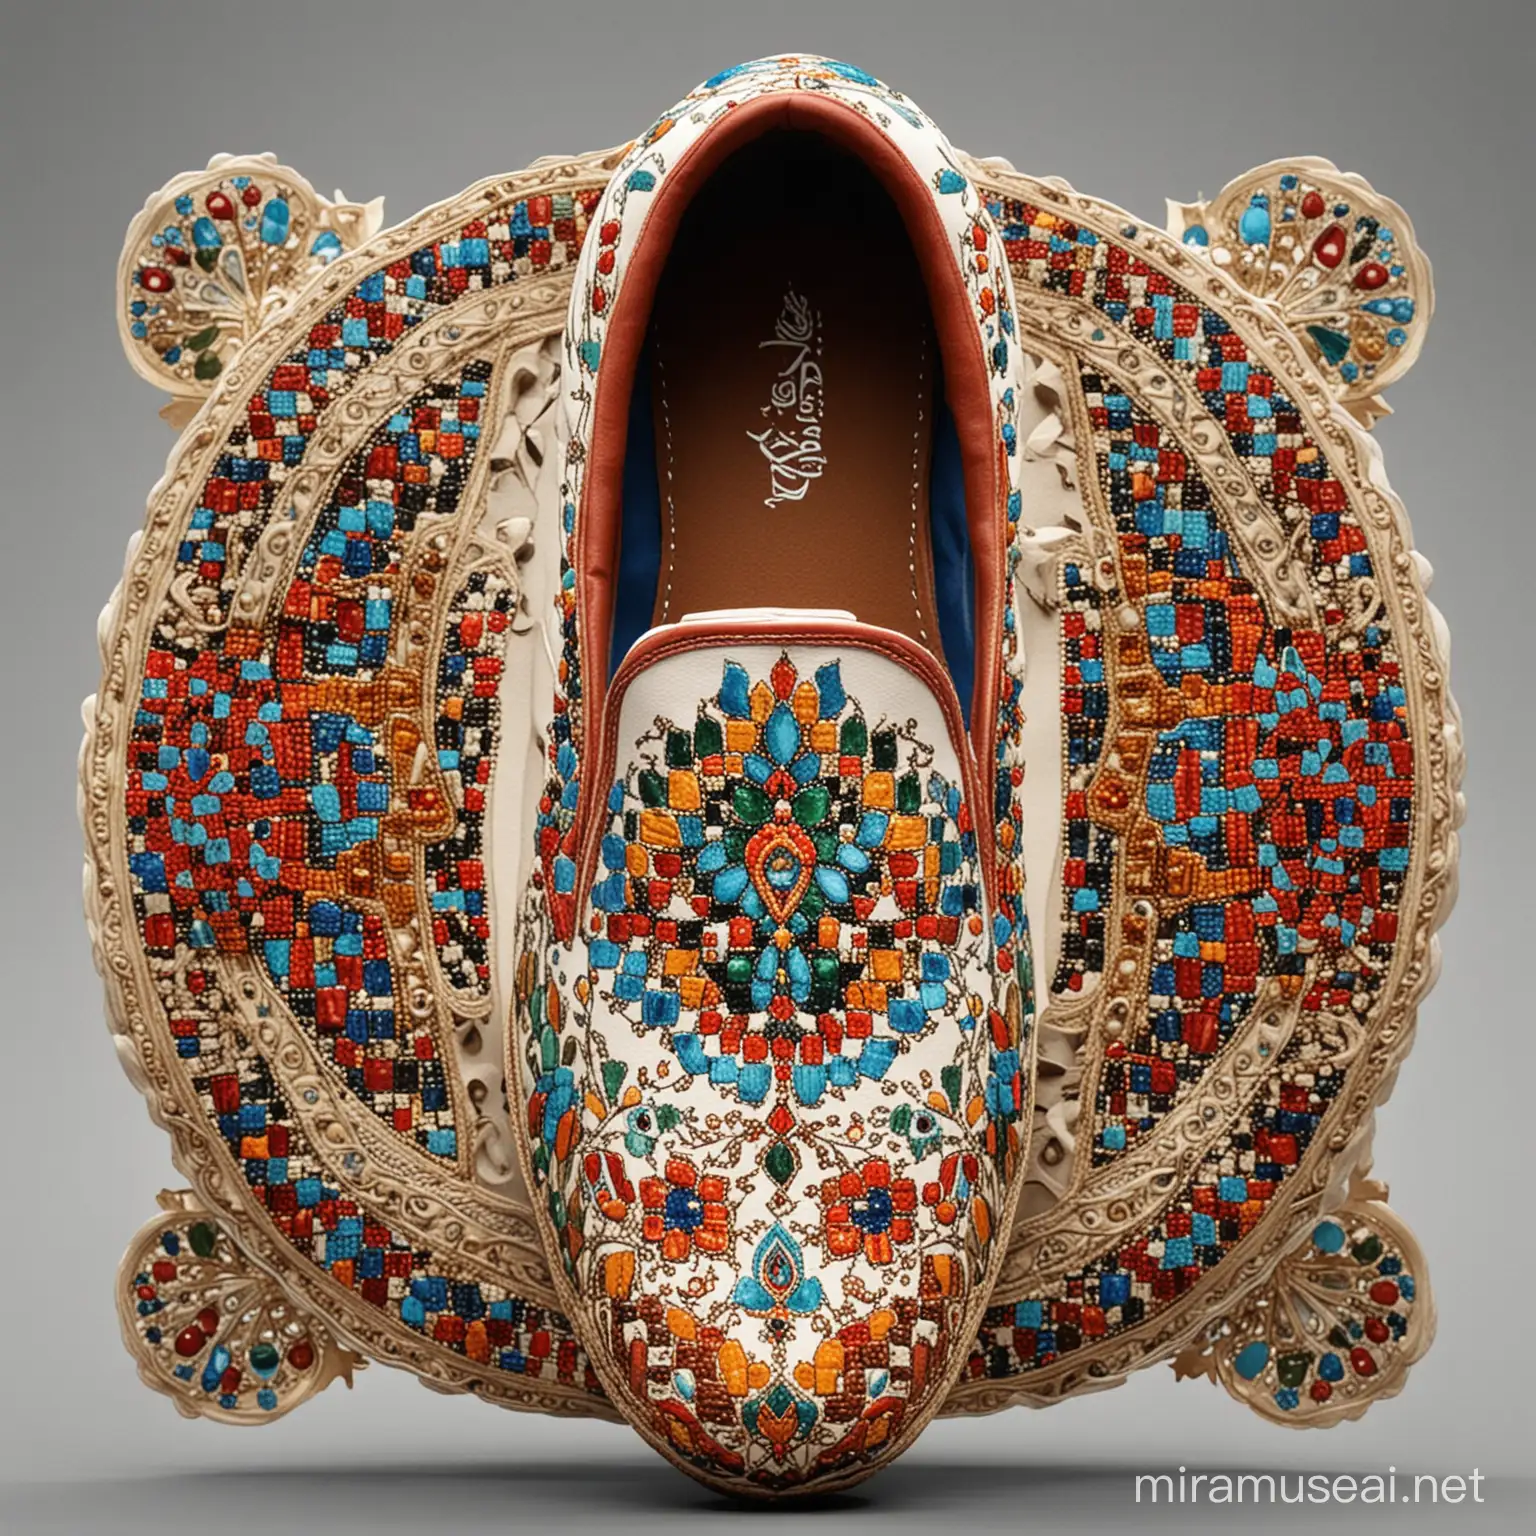 design a shoe including the culture Figures of Mevlana and Konya province of Turkey